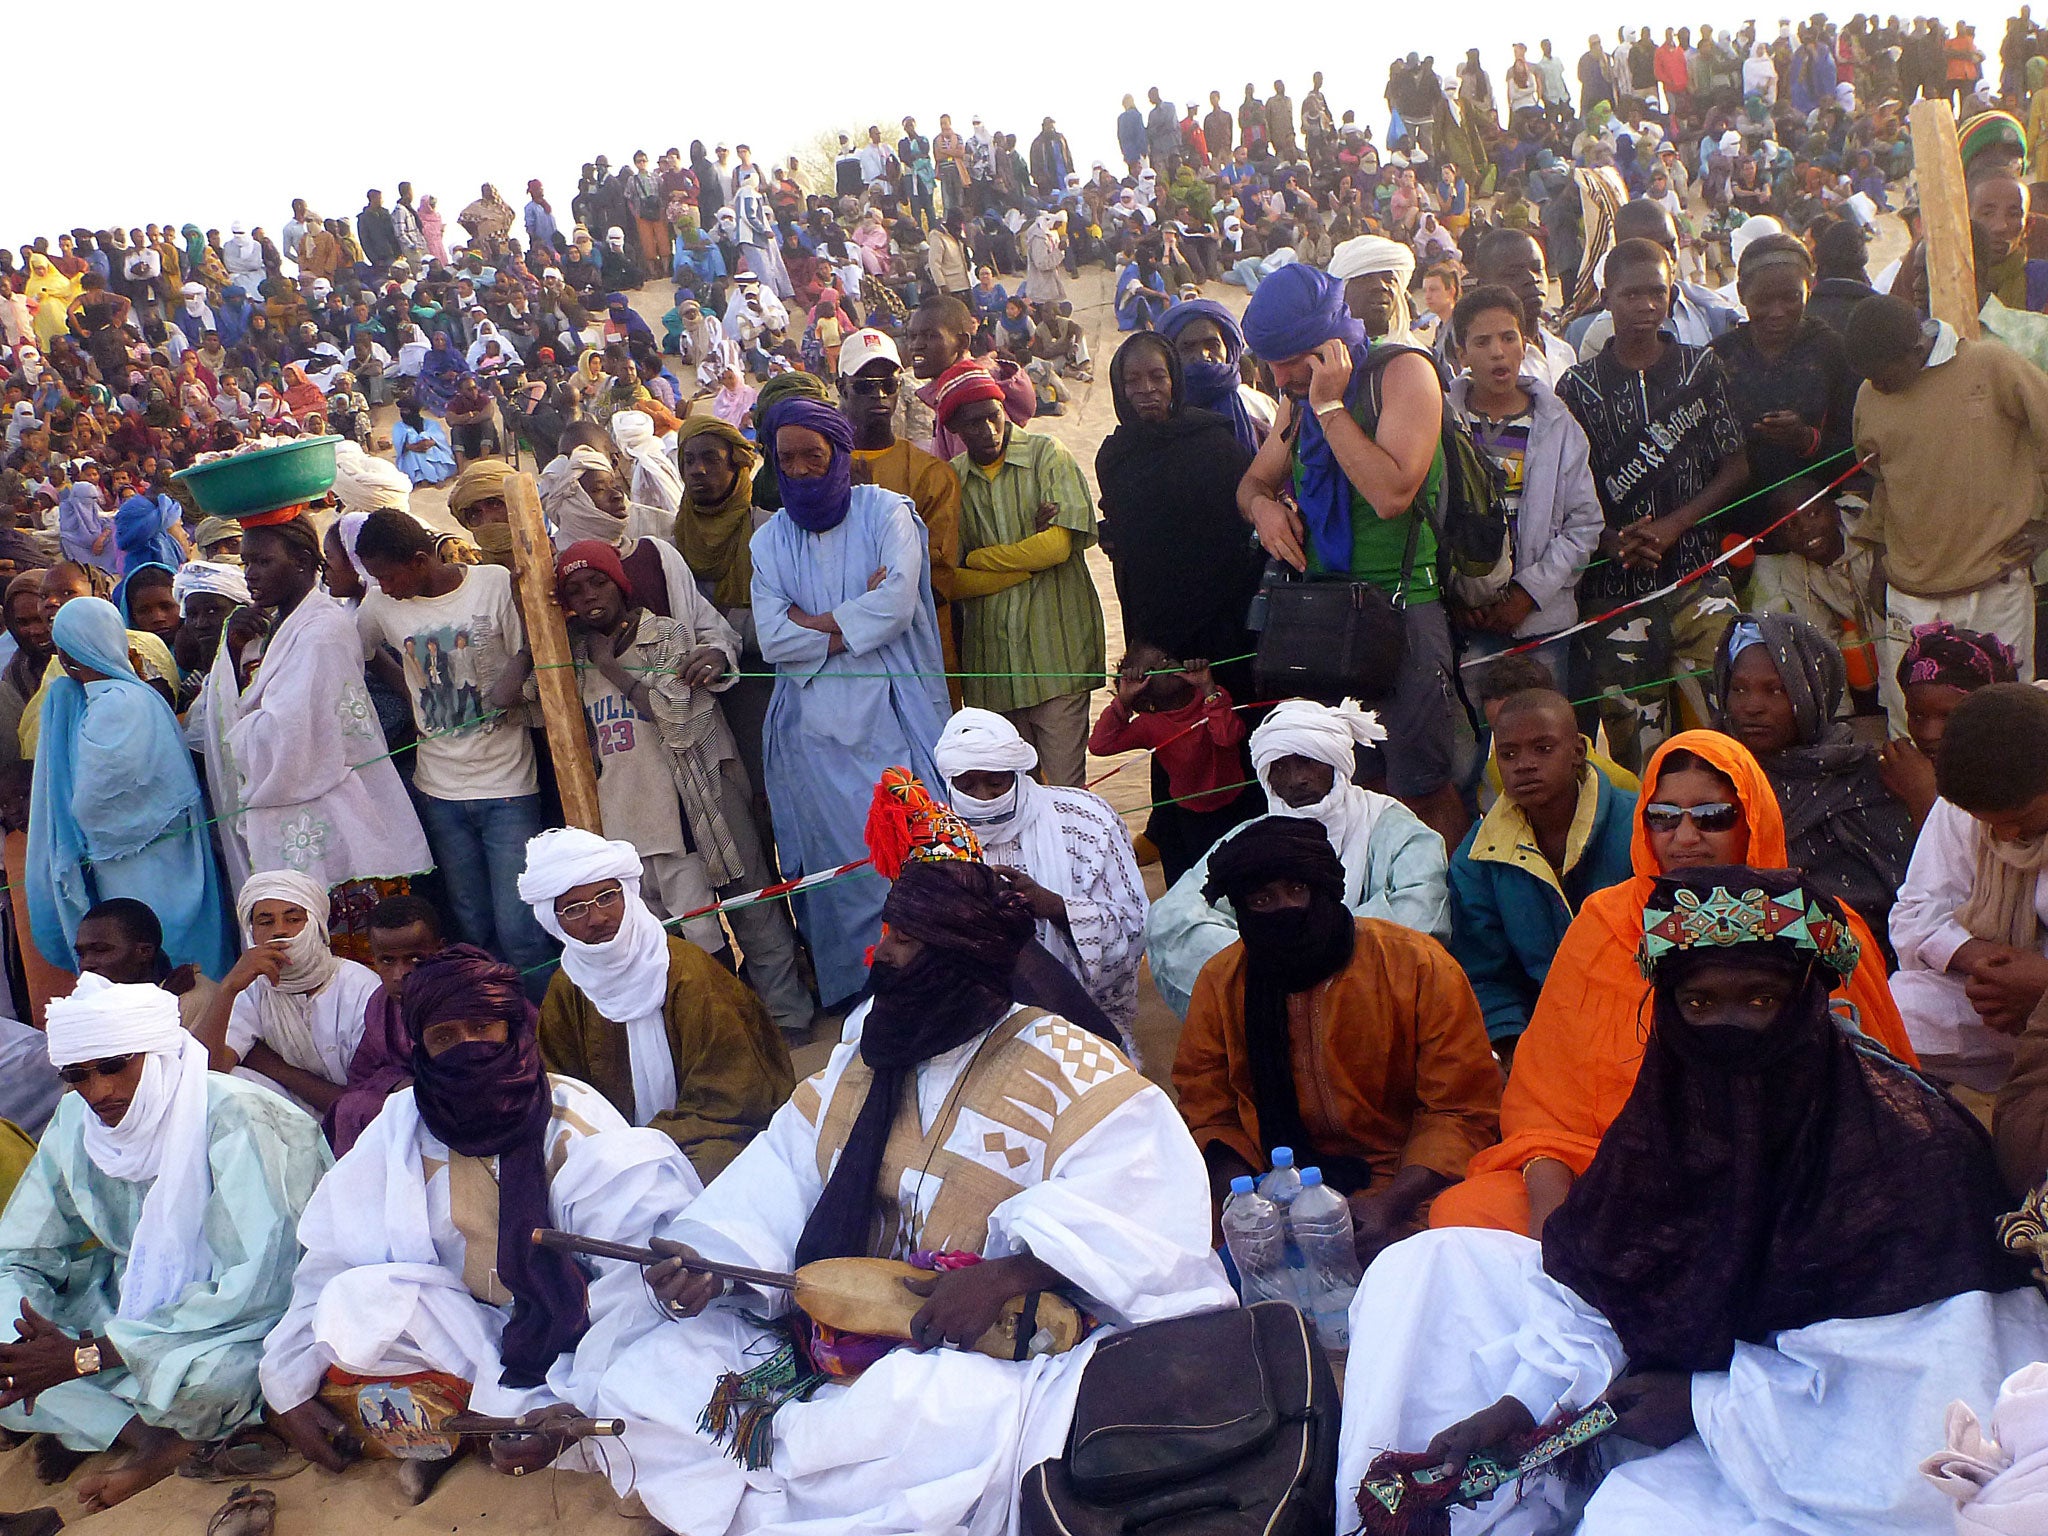 In unison: Much of Mali’s music has been banned since last year’s Festival in the Desert